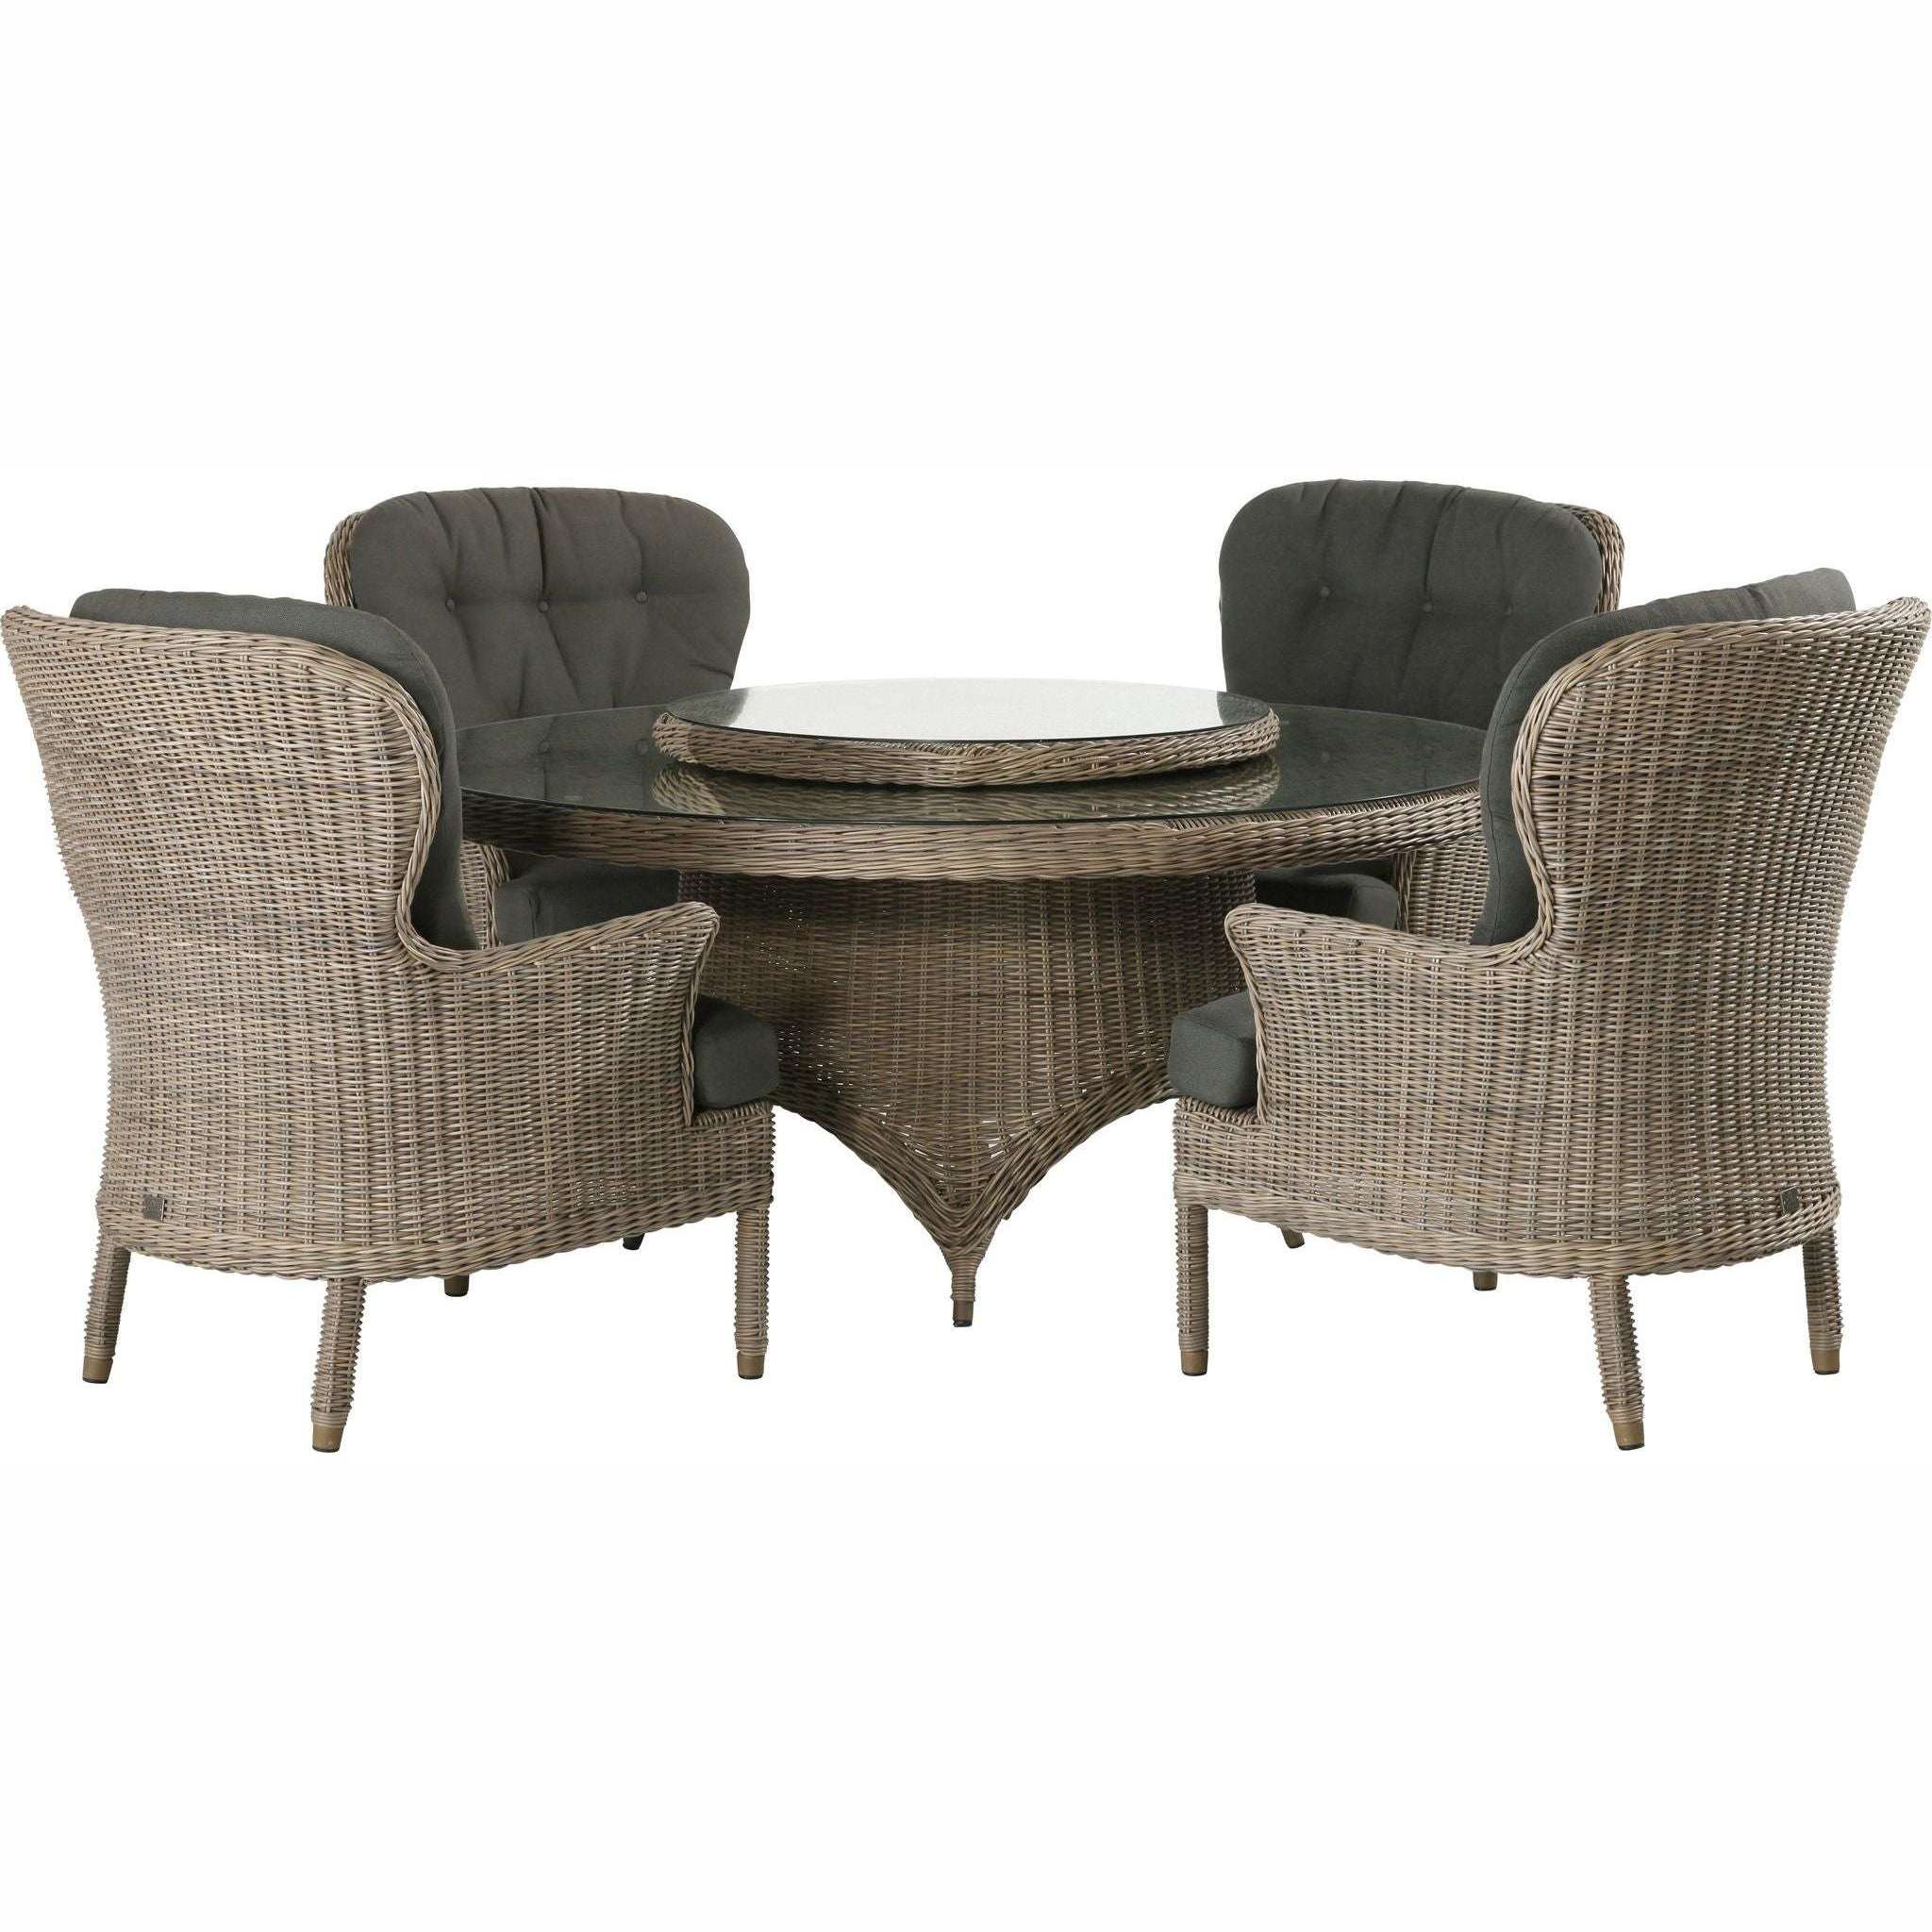 Exceptional Garden:4 Seasons Outdoor Buckingham 4 seater Dining Set with 170cm Victoria Table and Woven Lazy Susan